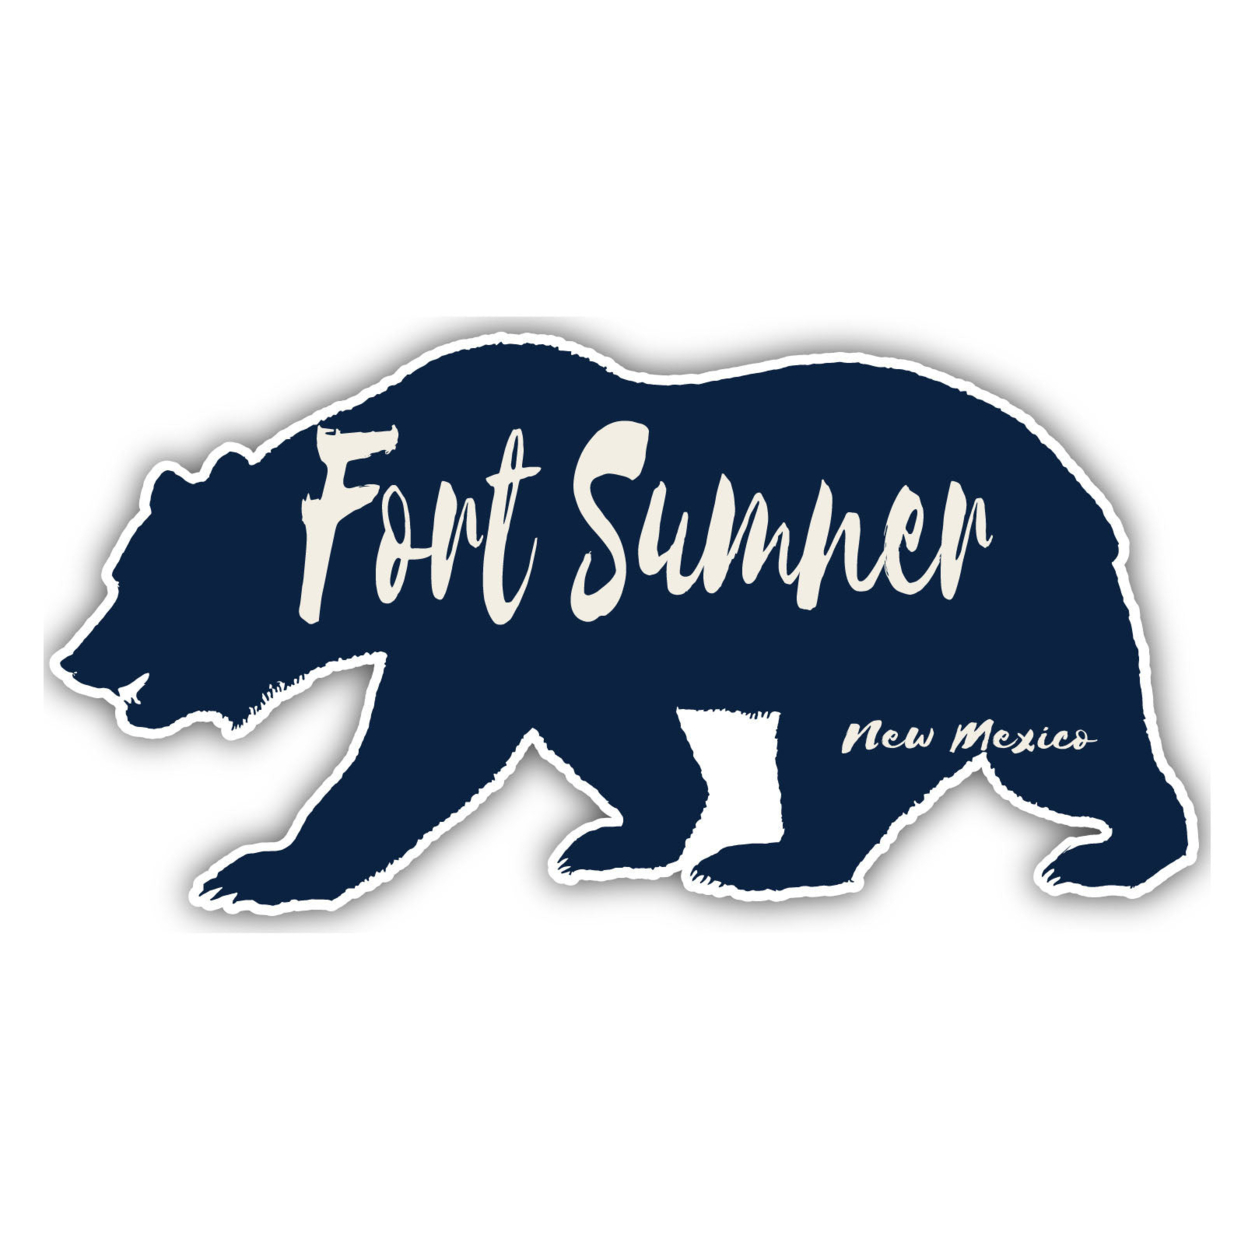 Fort Sumner New Mexico Souvenir Decorative Stickers (Choose Theme And Size) - Single Unit, 8-Inch, Bear